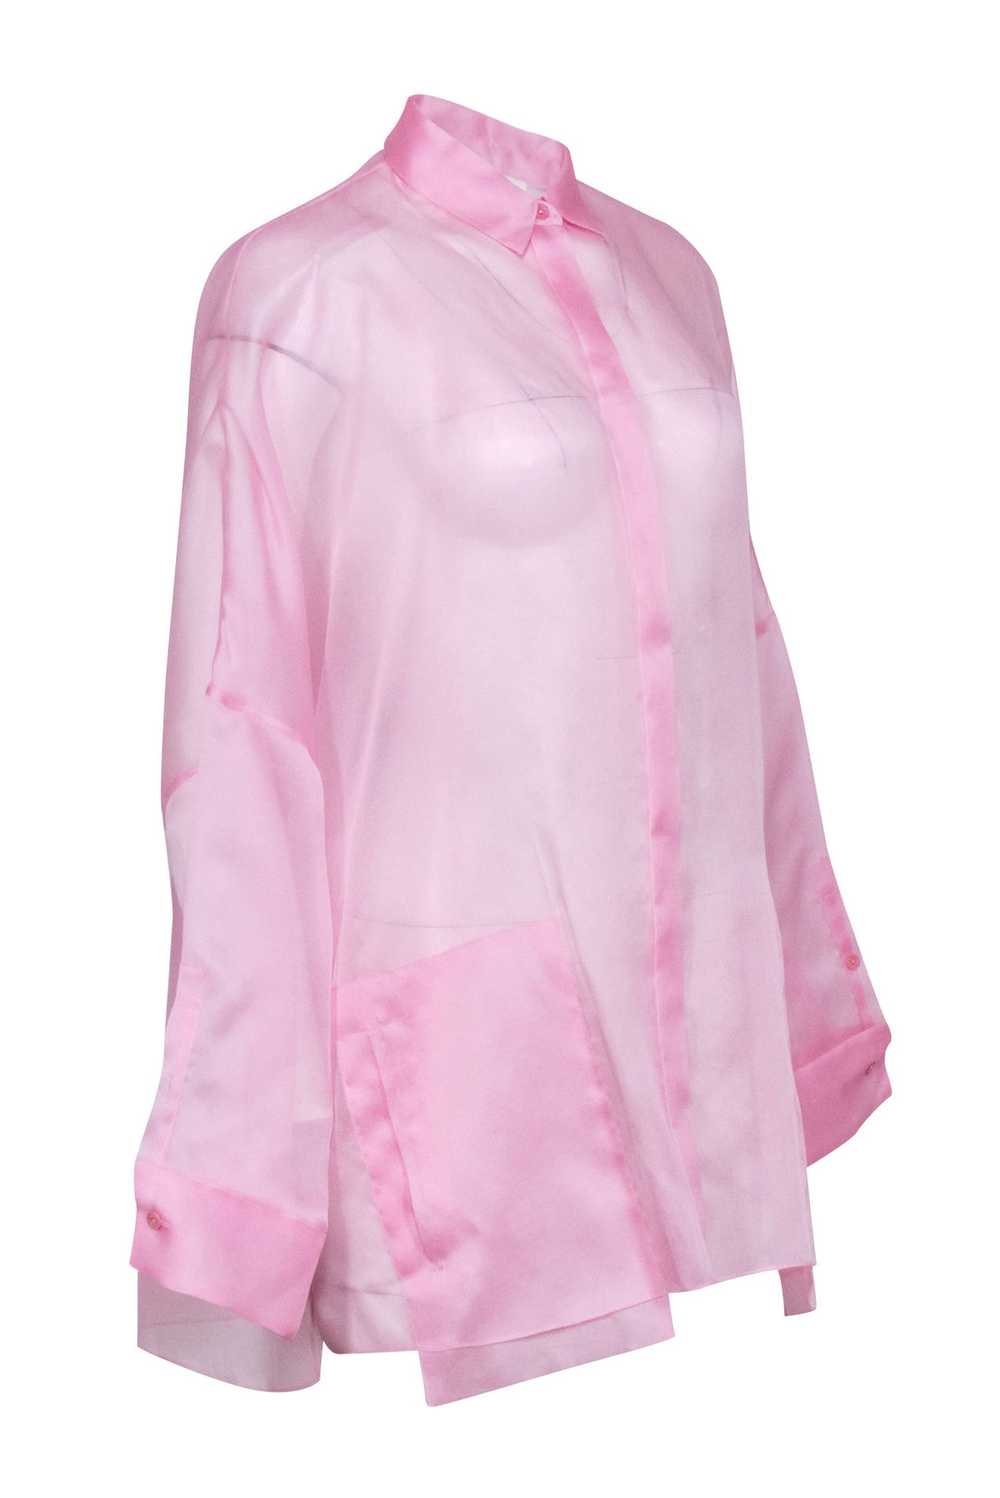 Lapointe - Pink Silk Sheer Button-Up Oversized Bl… - image 2